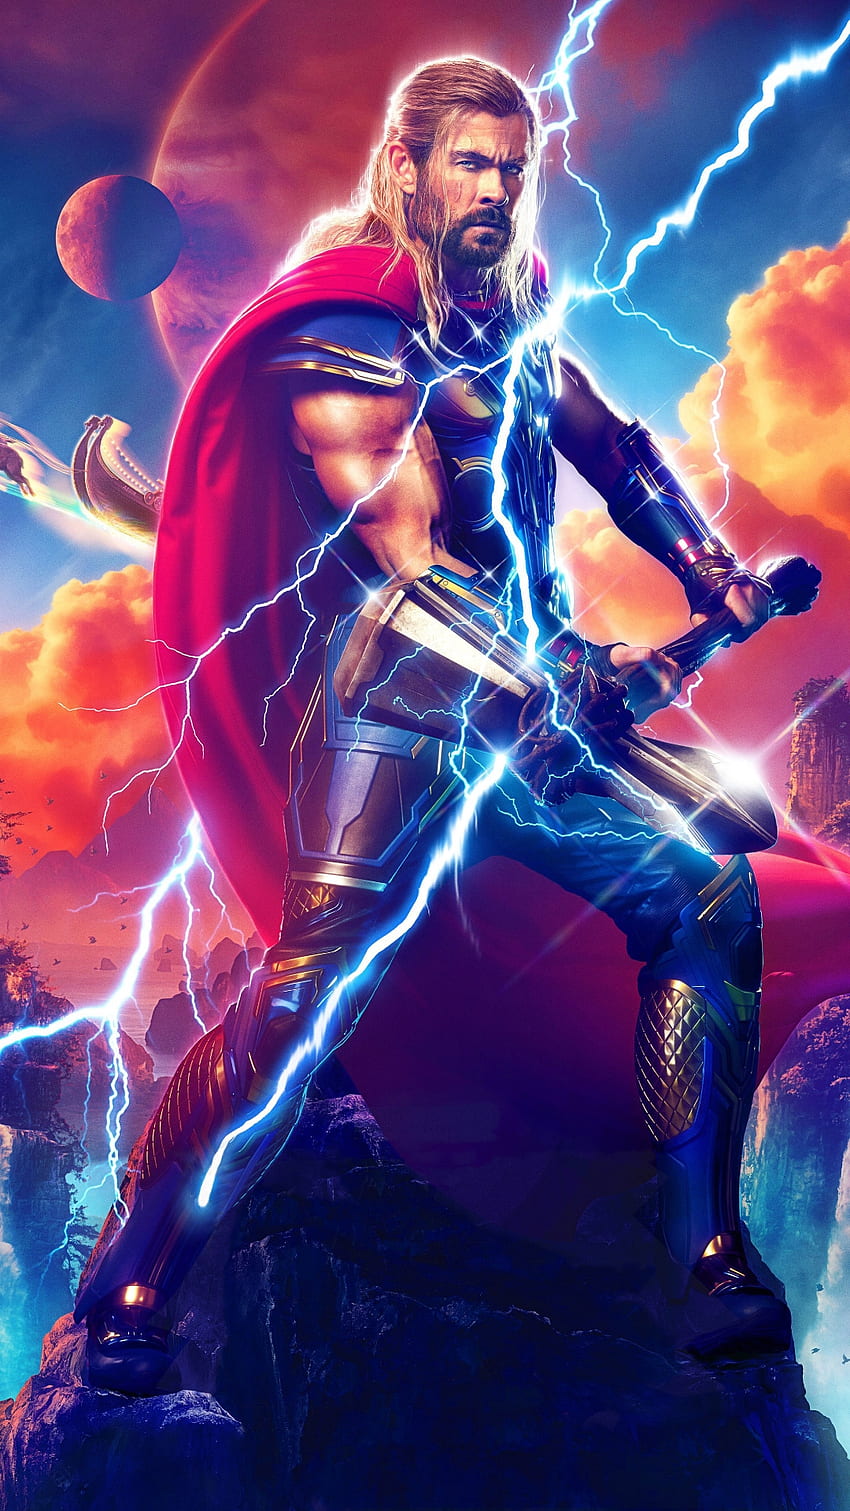 The Ultimate Collection of Top 999+ High-Definition Thor Images in Full 4K